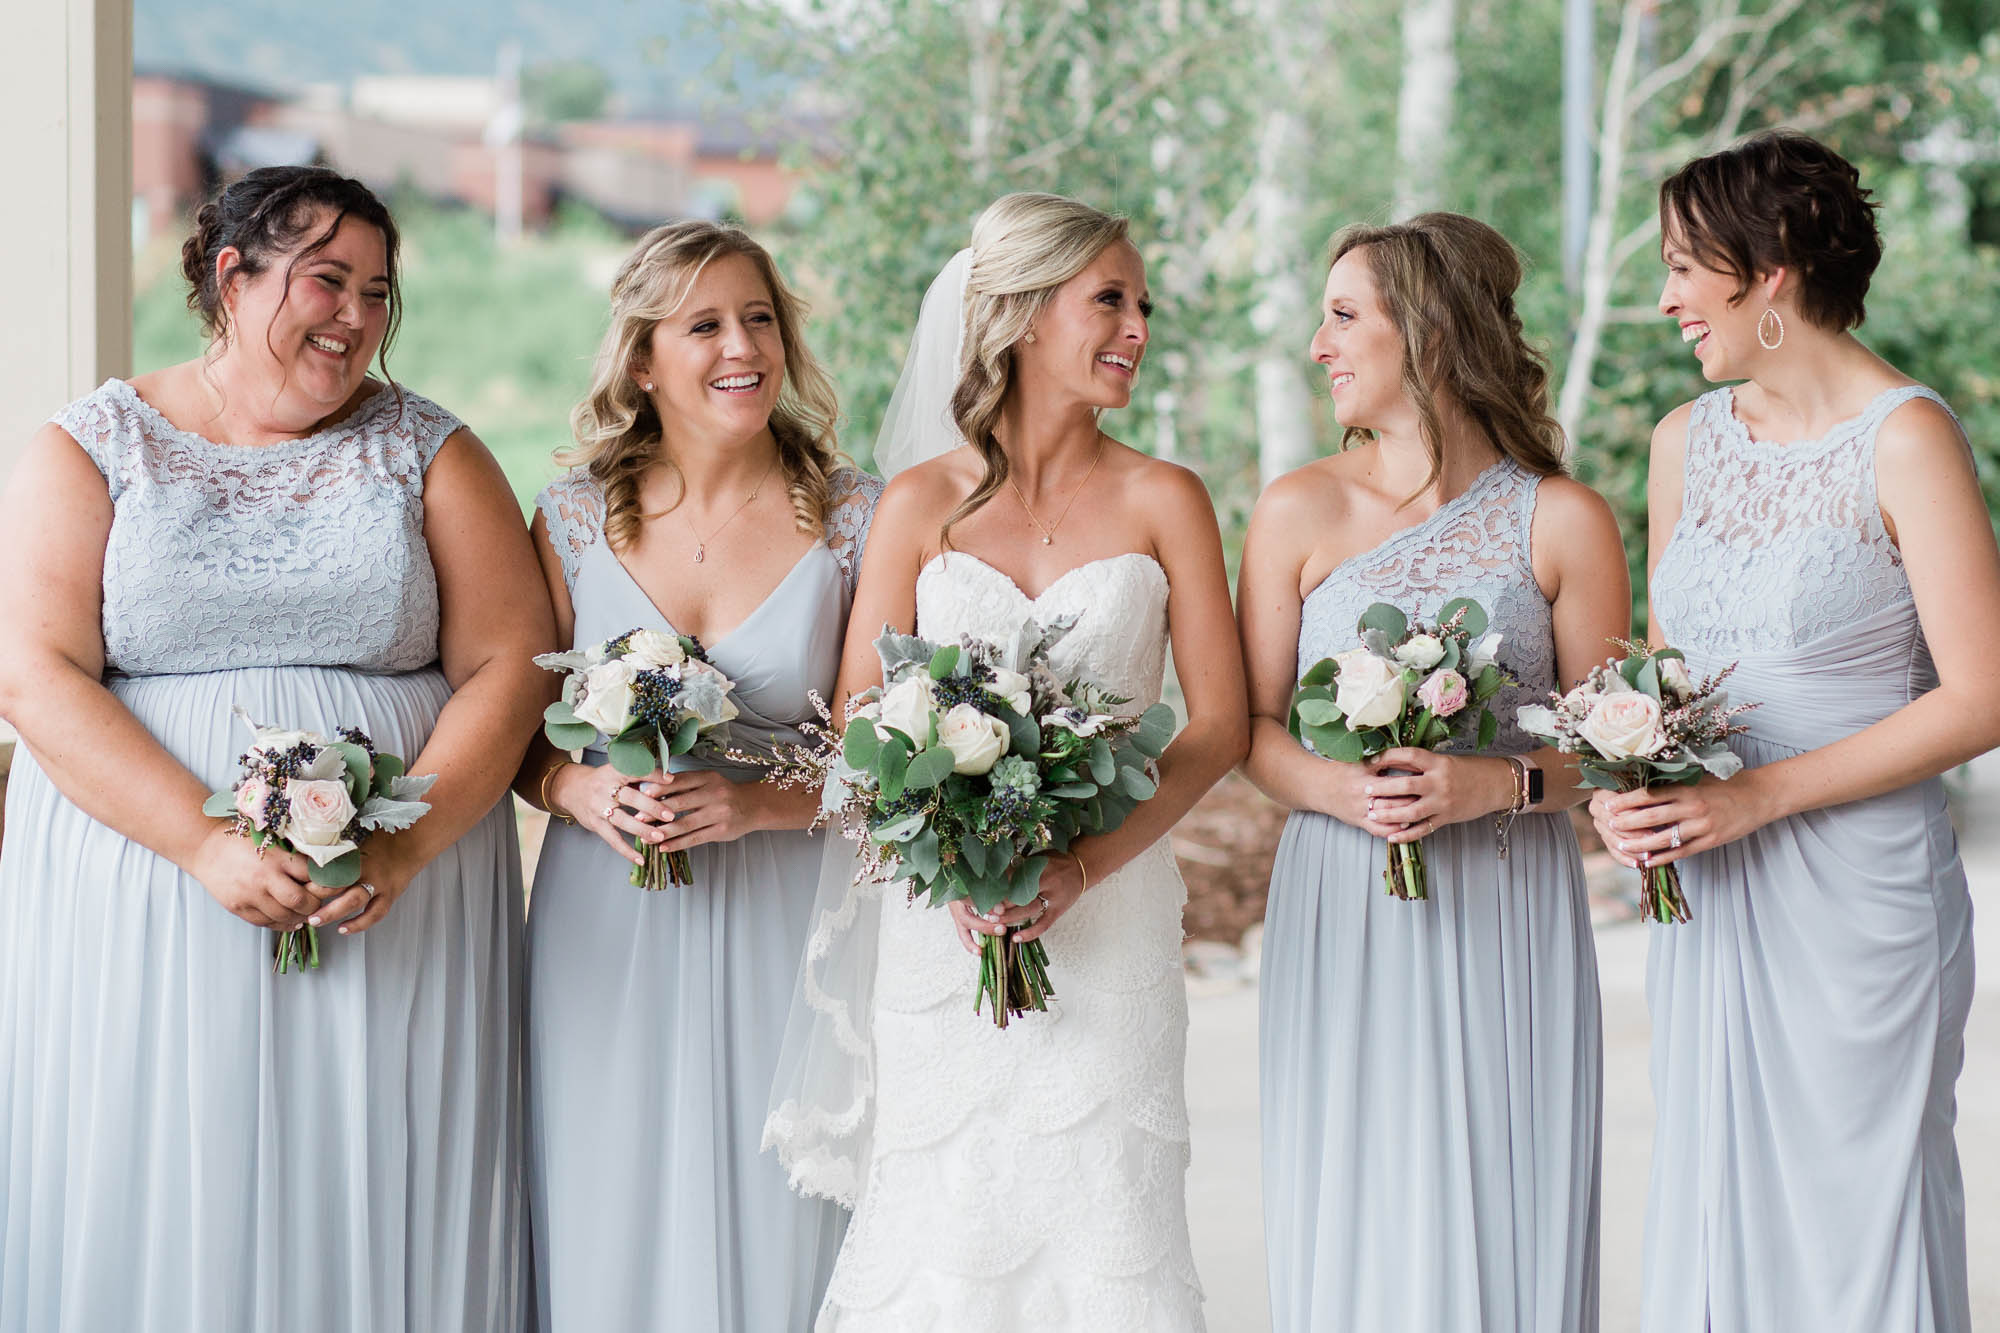 South Valley Park Bridesmaids Crew Photography